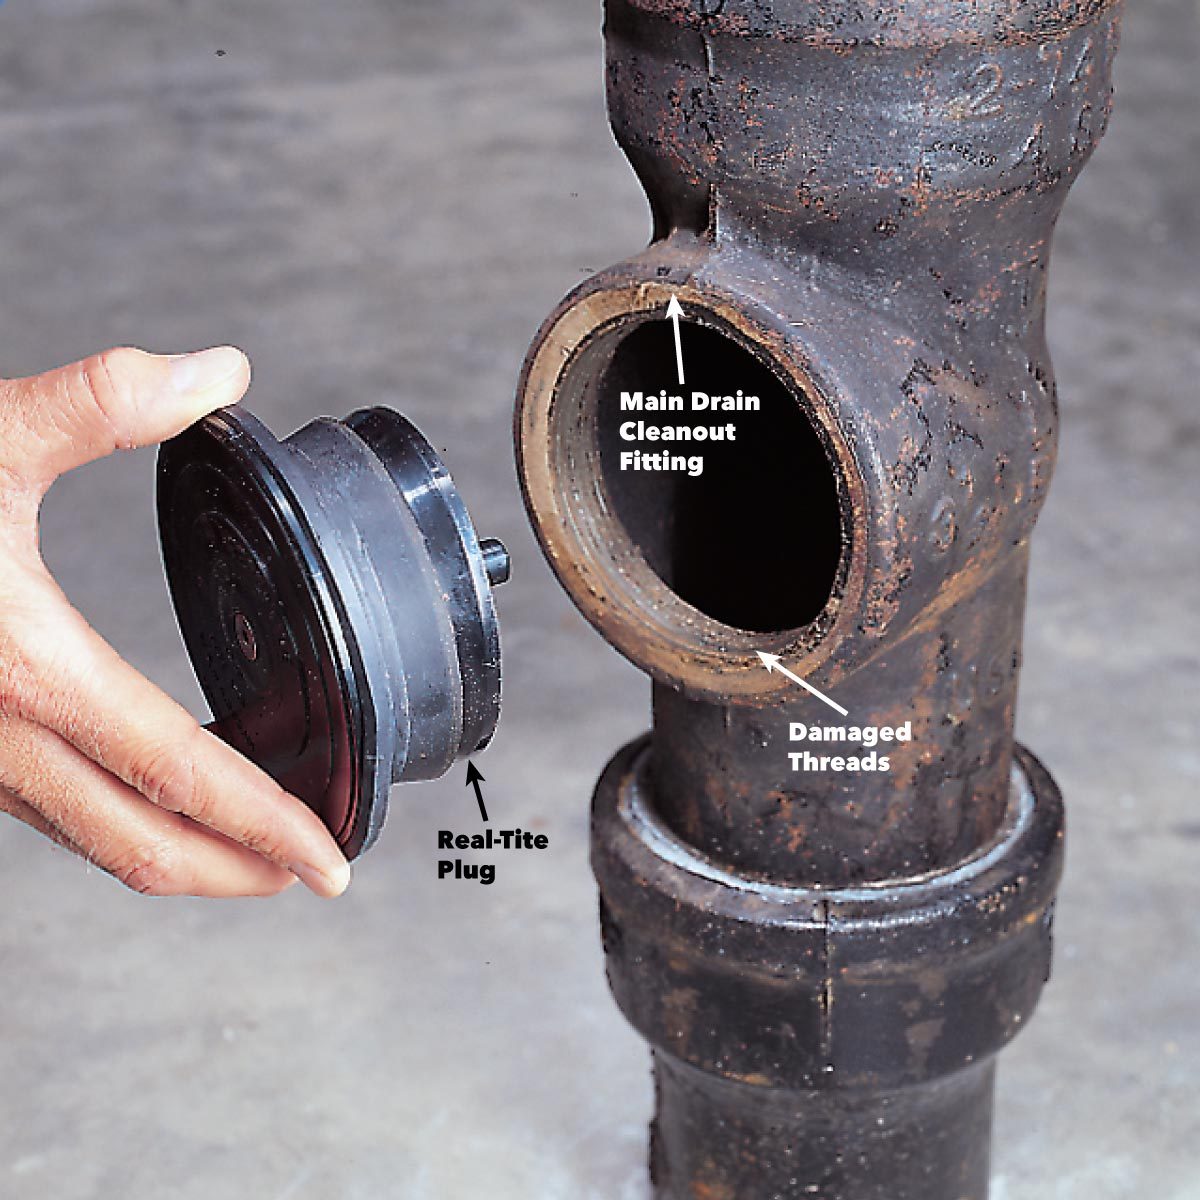 How To Unclog A Drain Tips From The Family Handyman